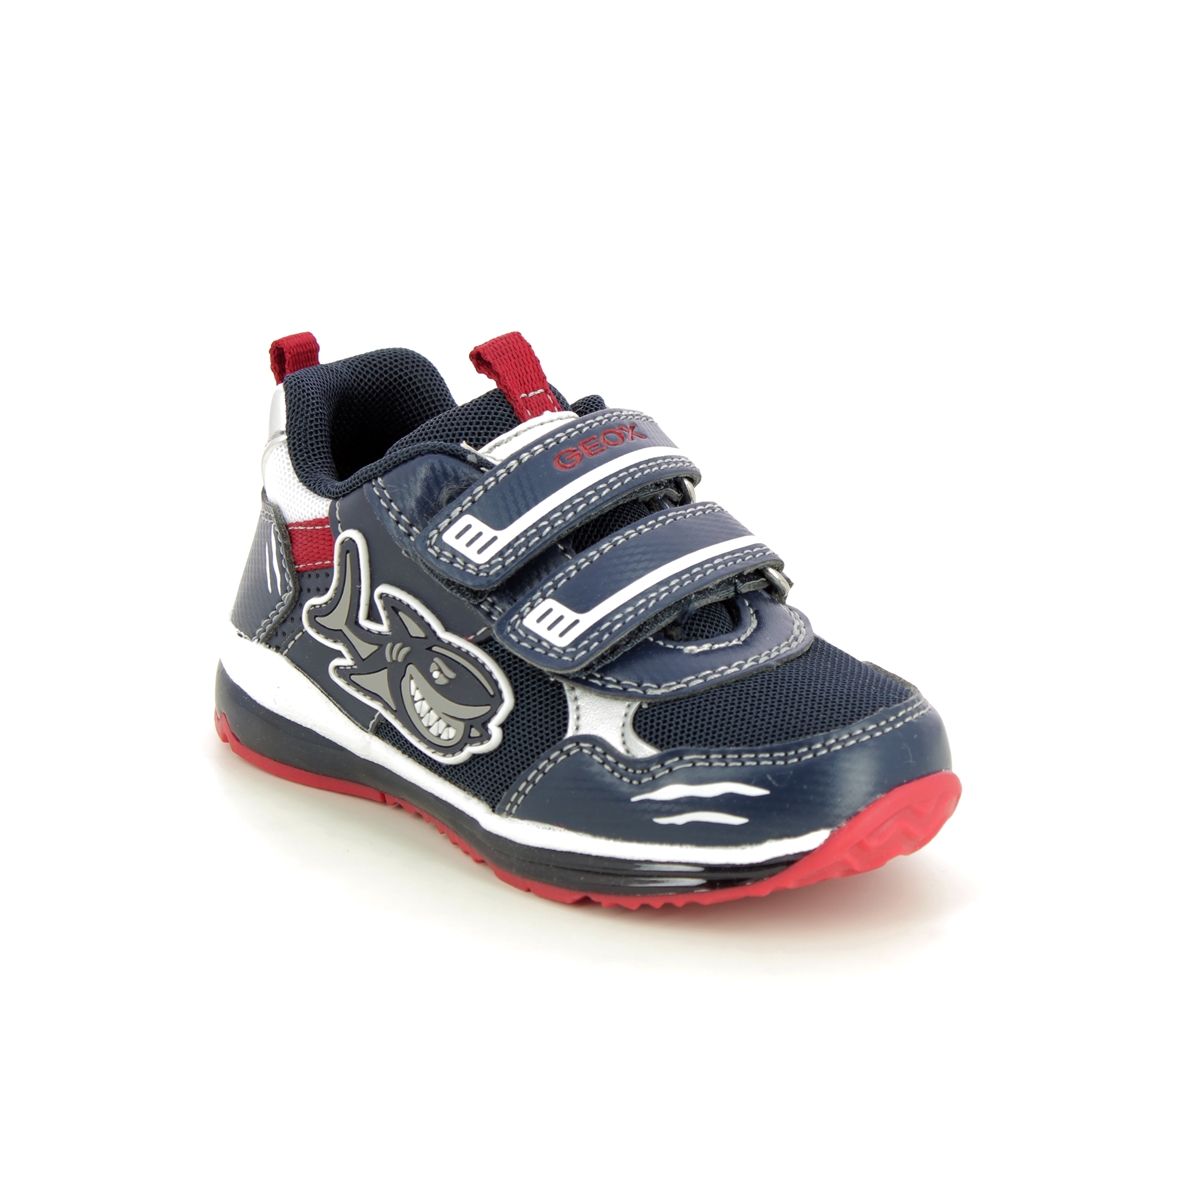 Geox Todo Shark 2v Navy Red Kids trainers B2584A-C0735 in a Plain Man-made in Size 22